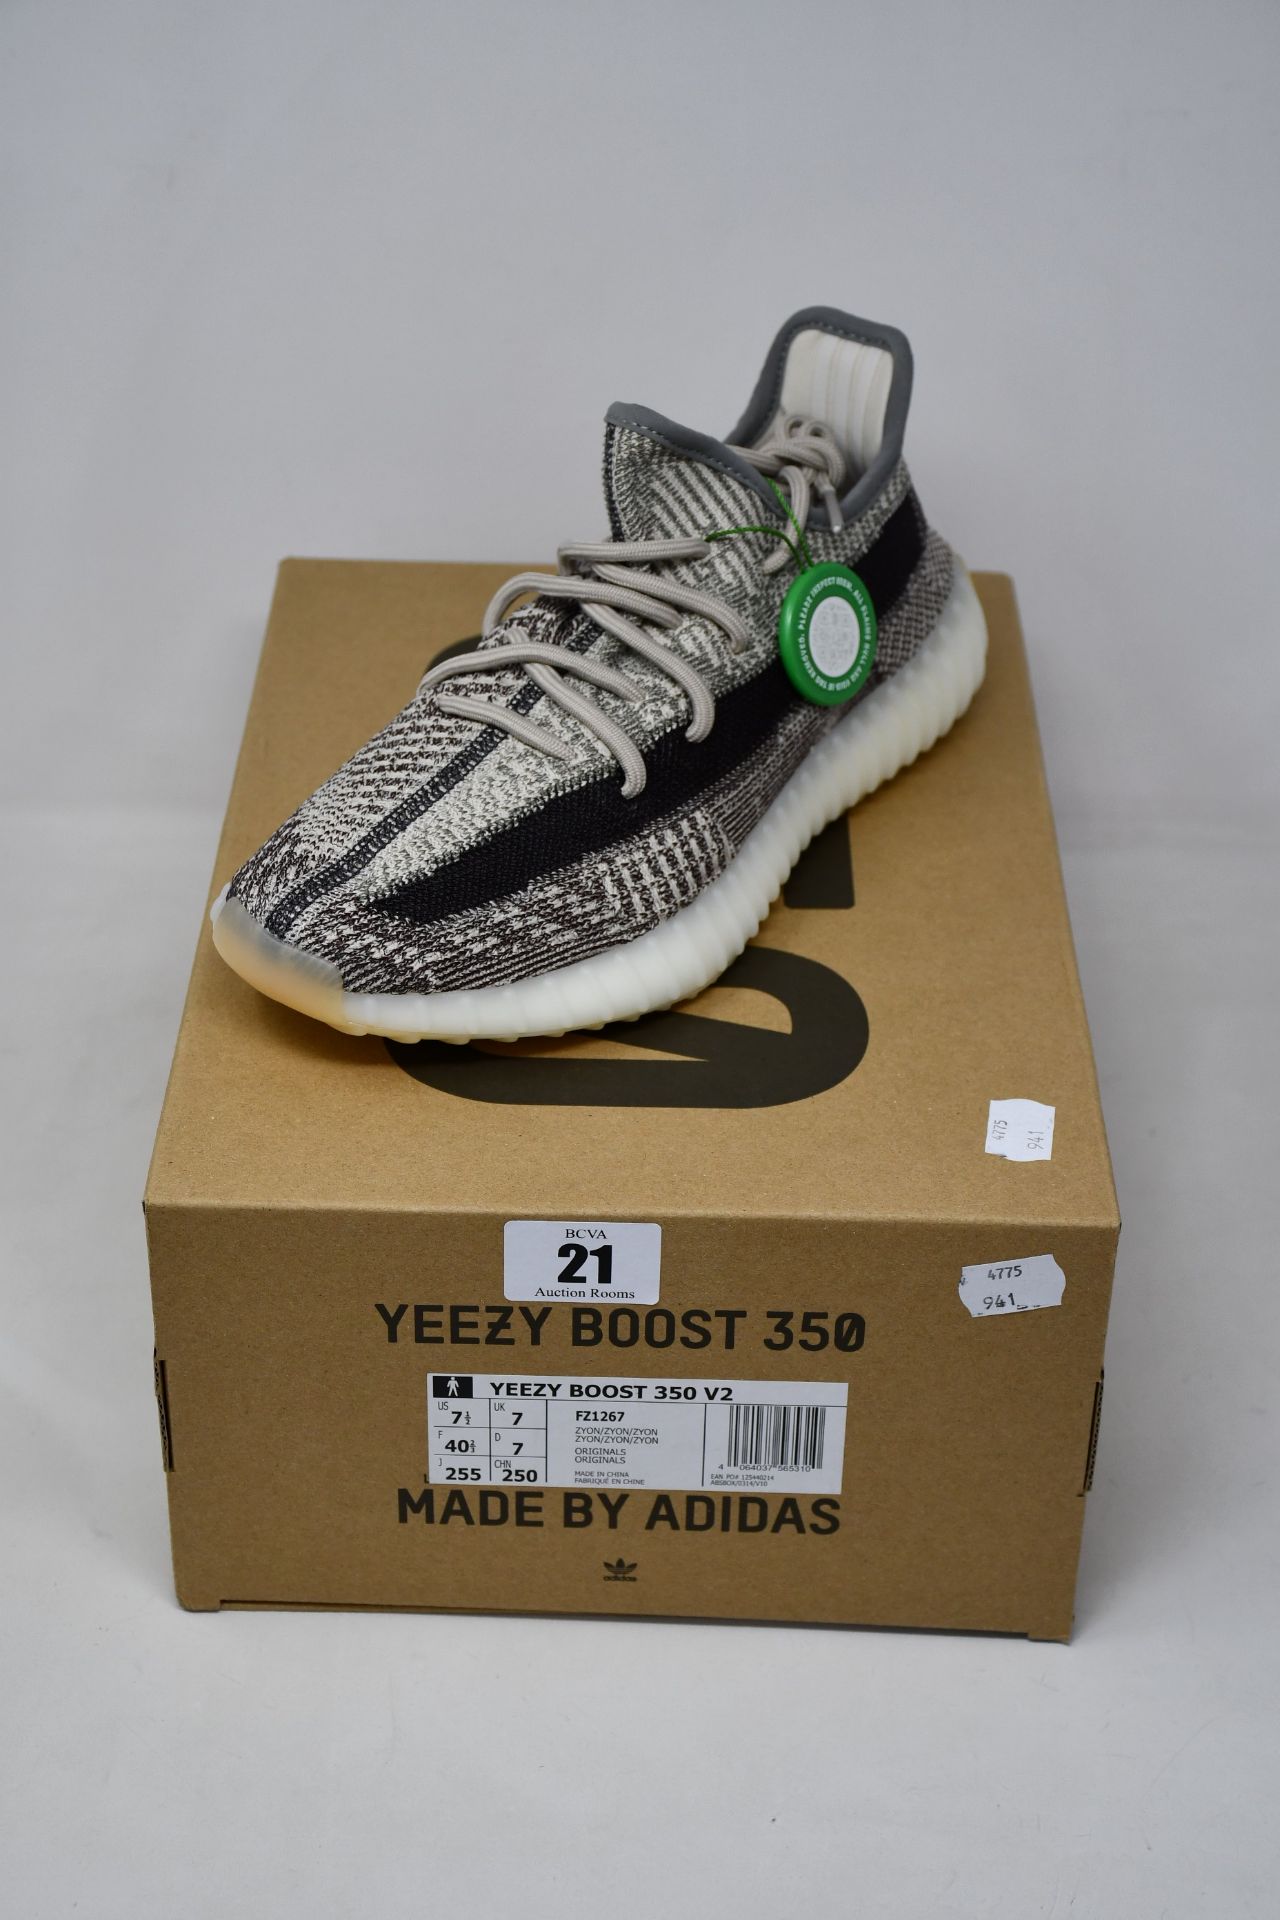 A pair of as new Adidas Yeezy Boost 350 V2 trainers (UK 7).